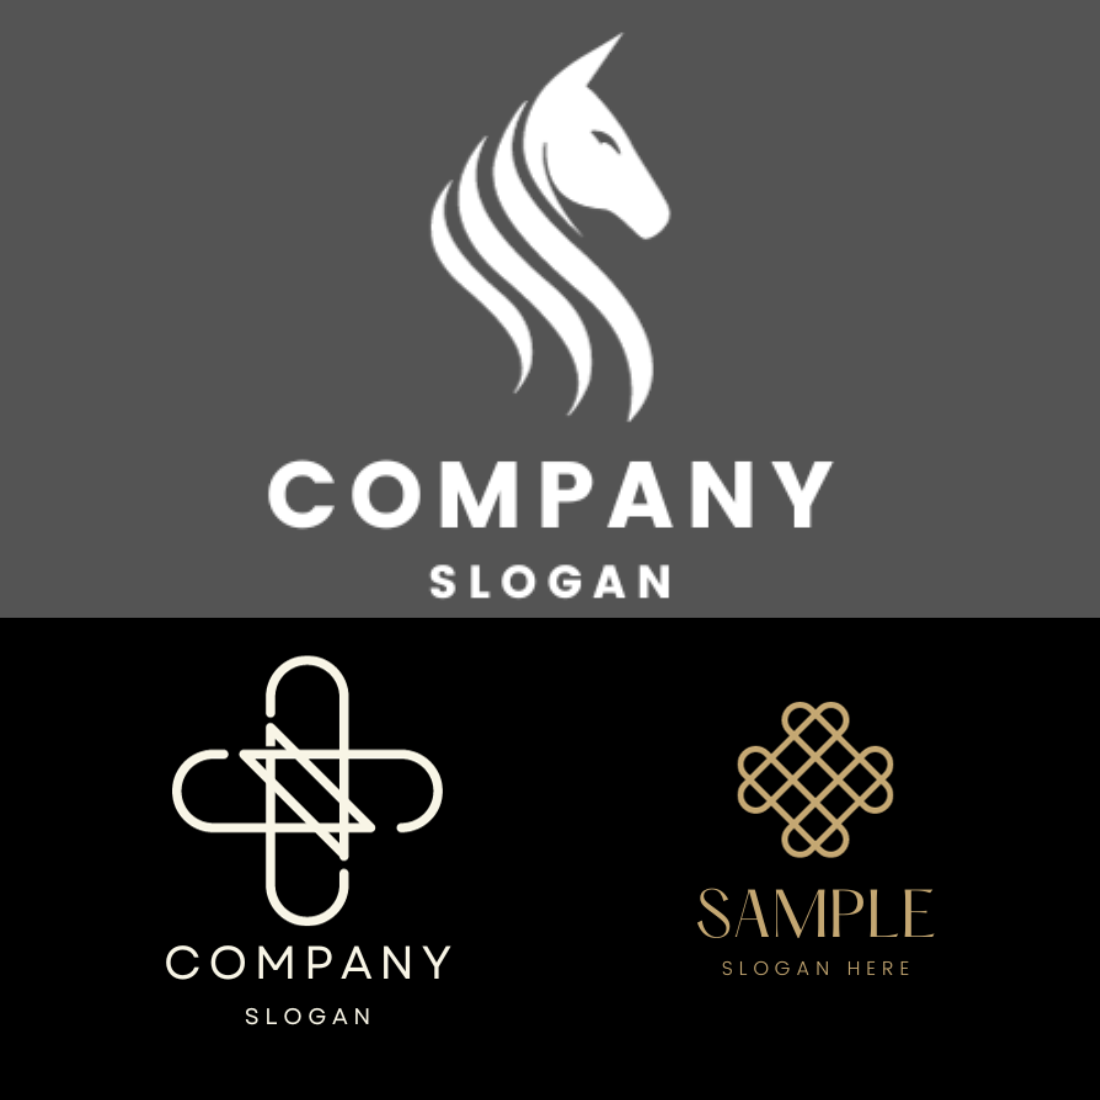 Professional and Minimalist Logos for 1$ cover image.